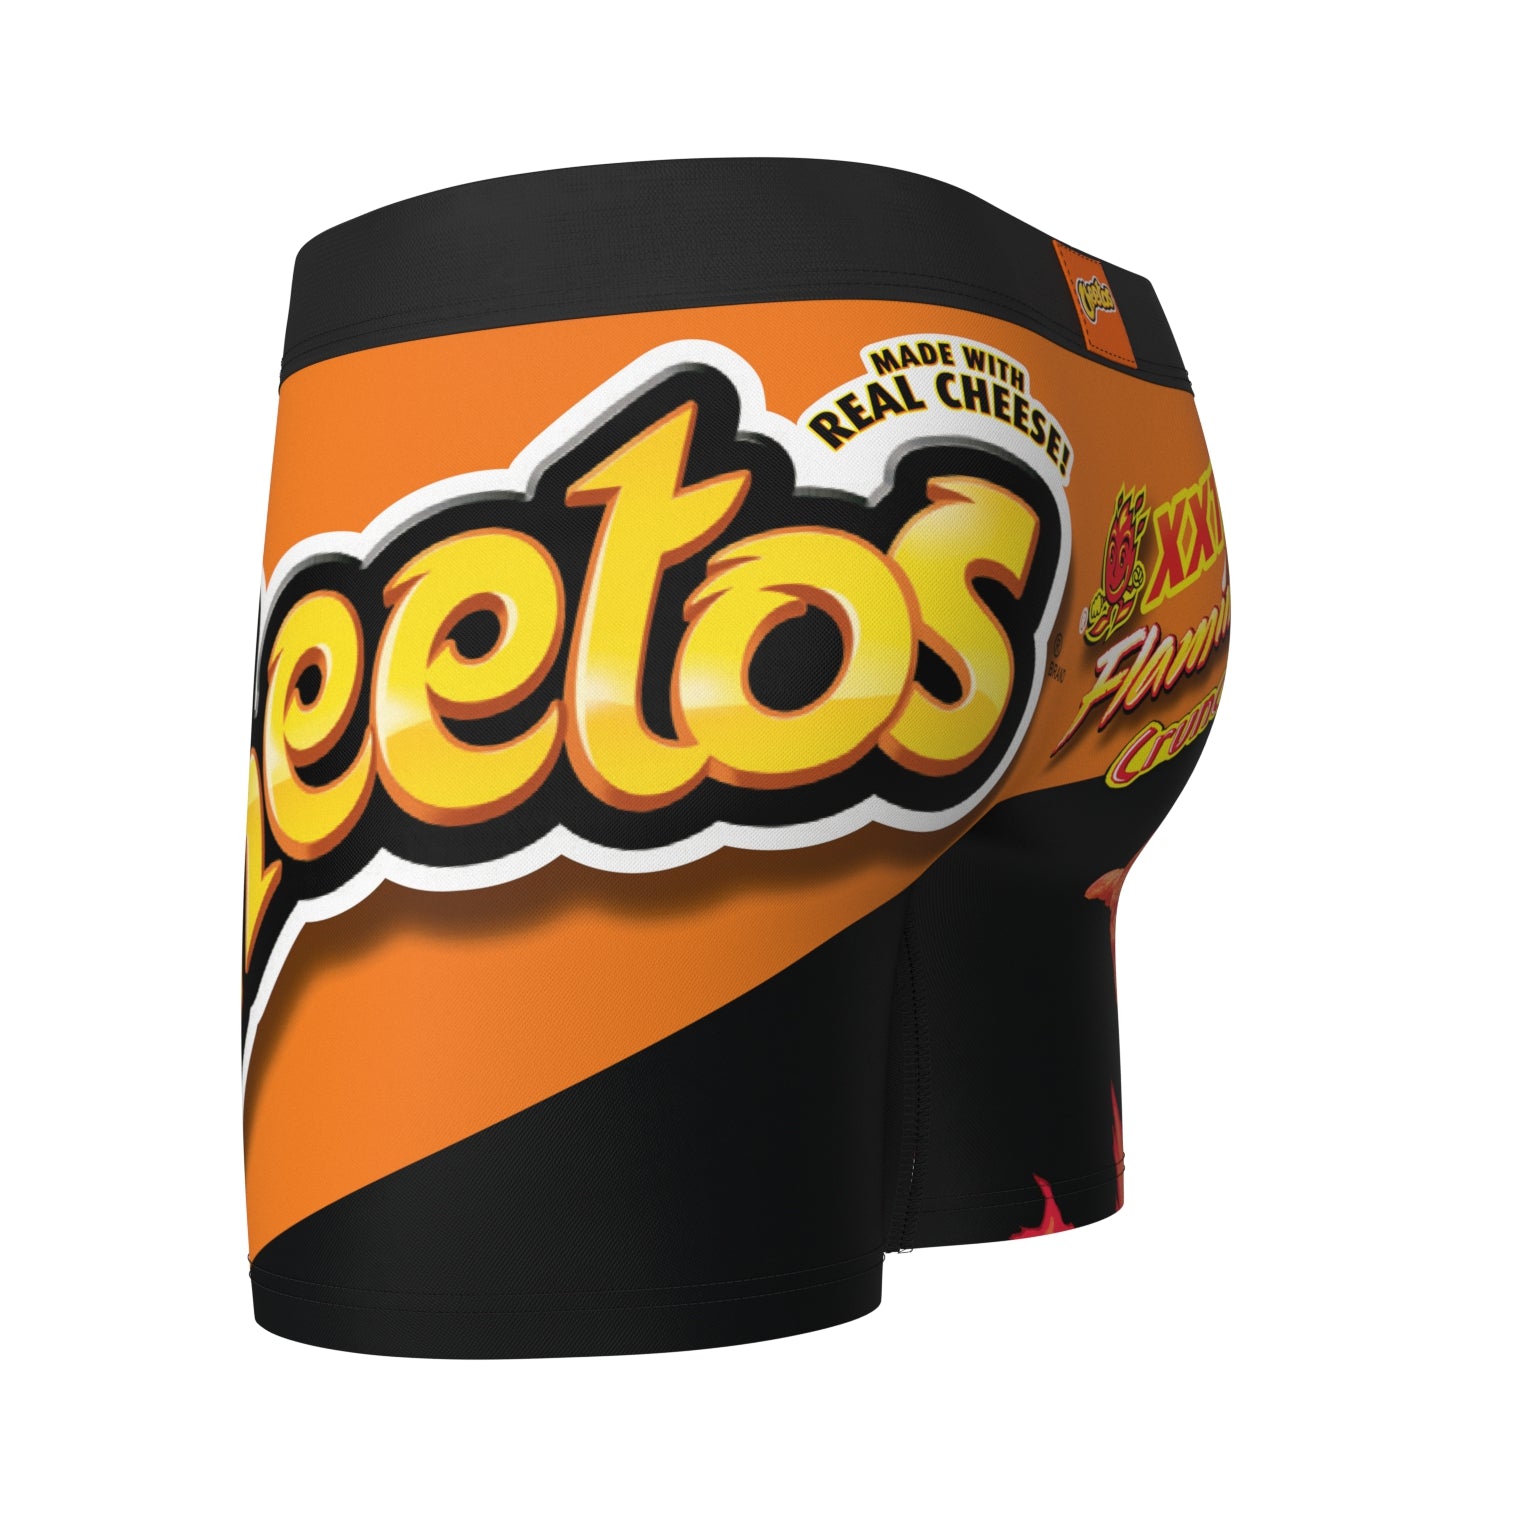 SWAG GROCERY AISLE BOXERS - CHEETOS XXTRA FLAMIN' HOT